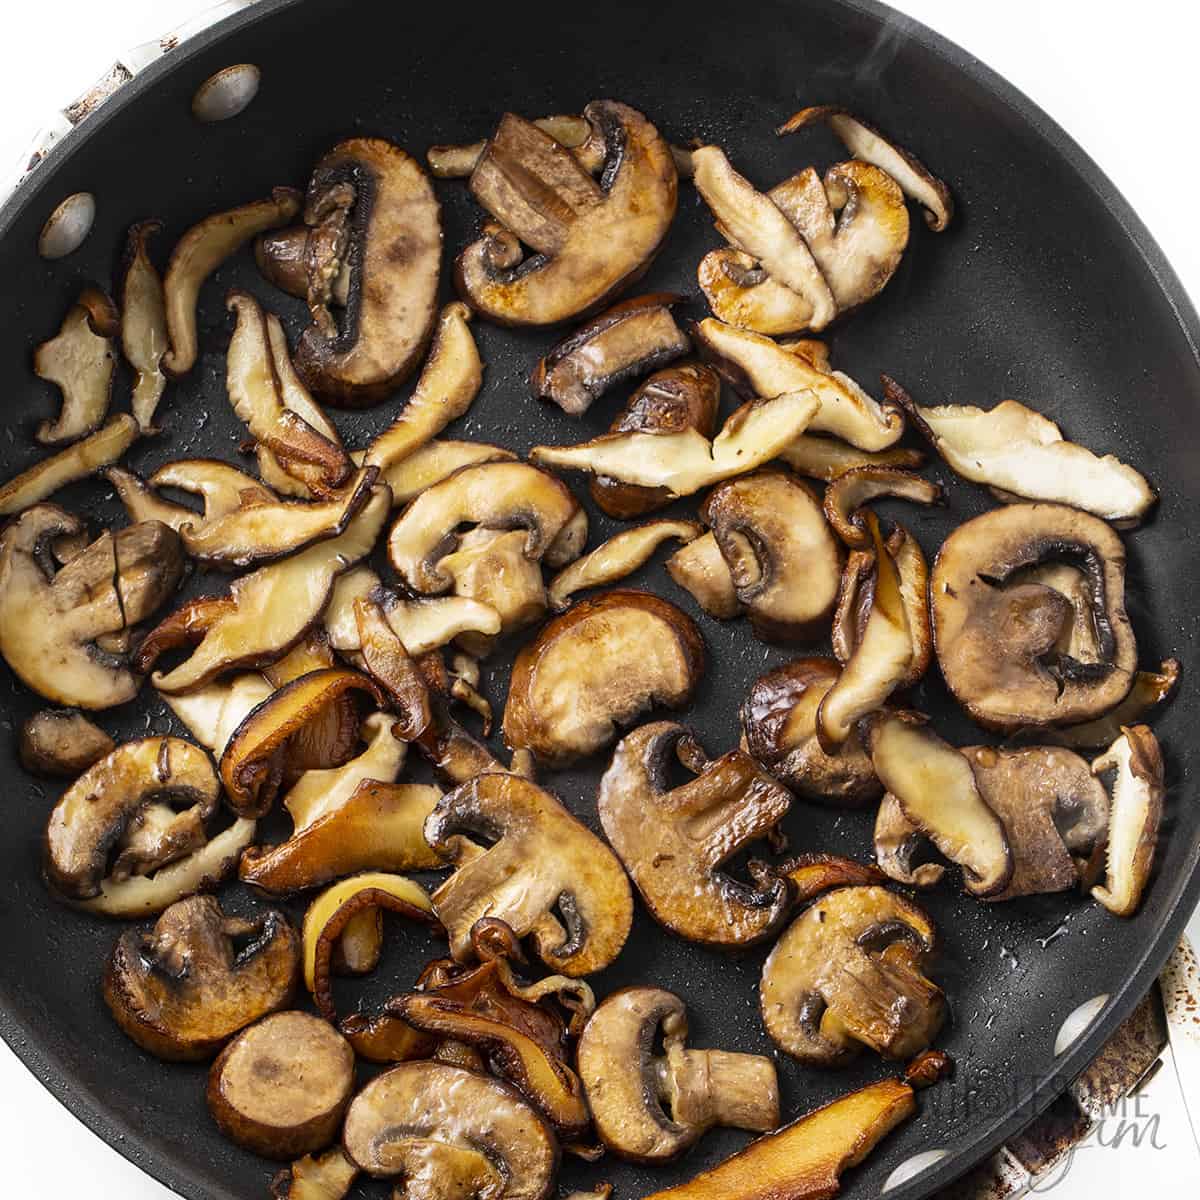 Finished first batch of sauteed mushrooms.